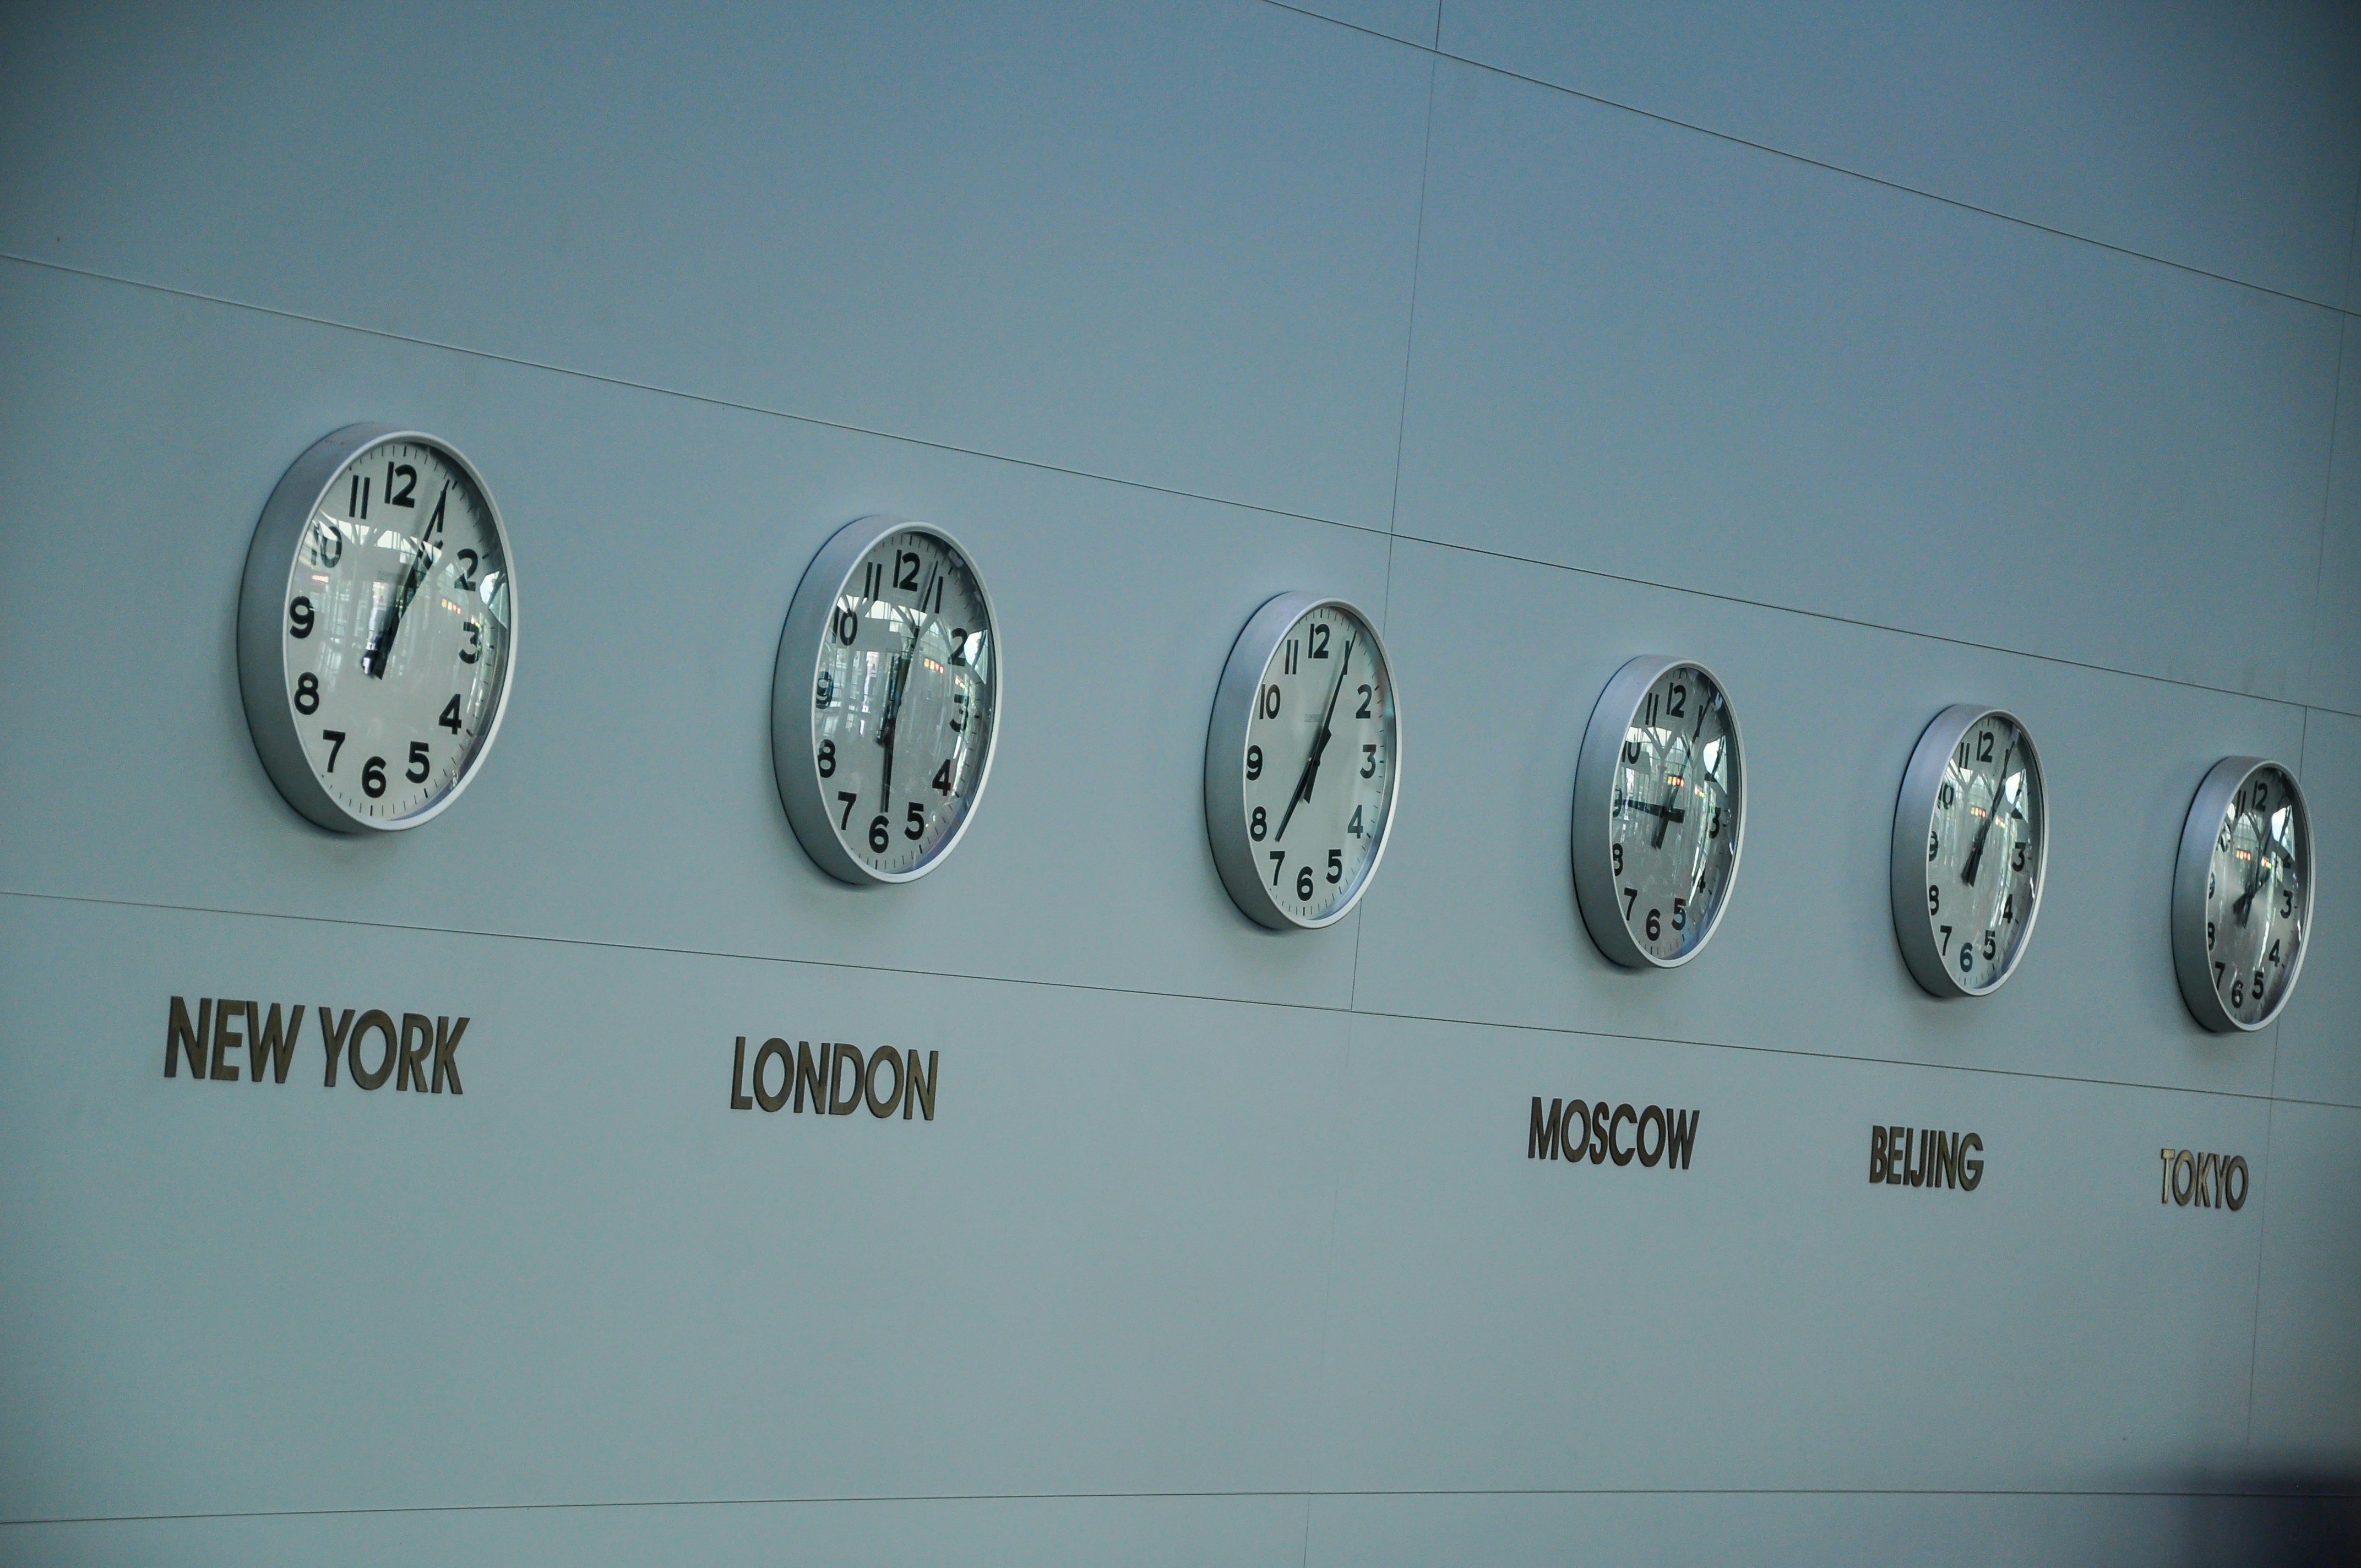 A wall of clocks in airport showing various time zones across the world